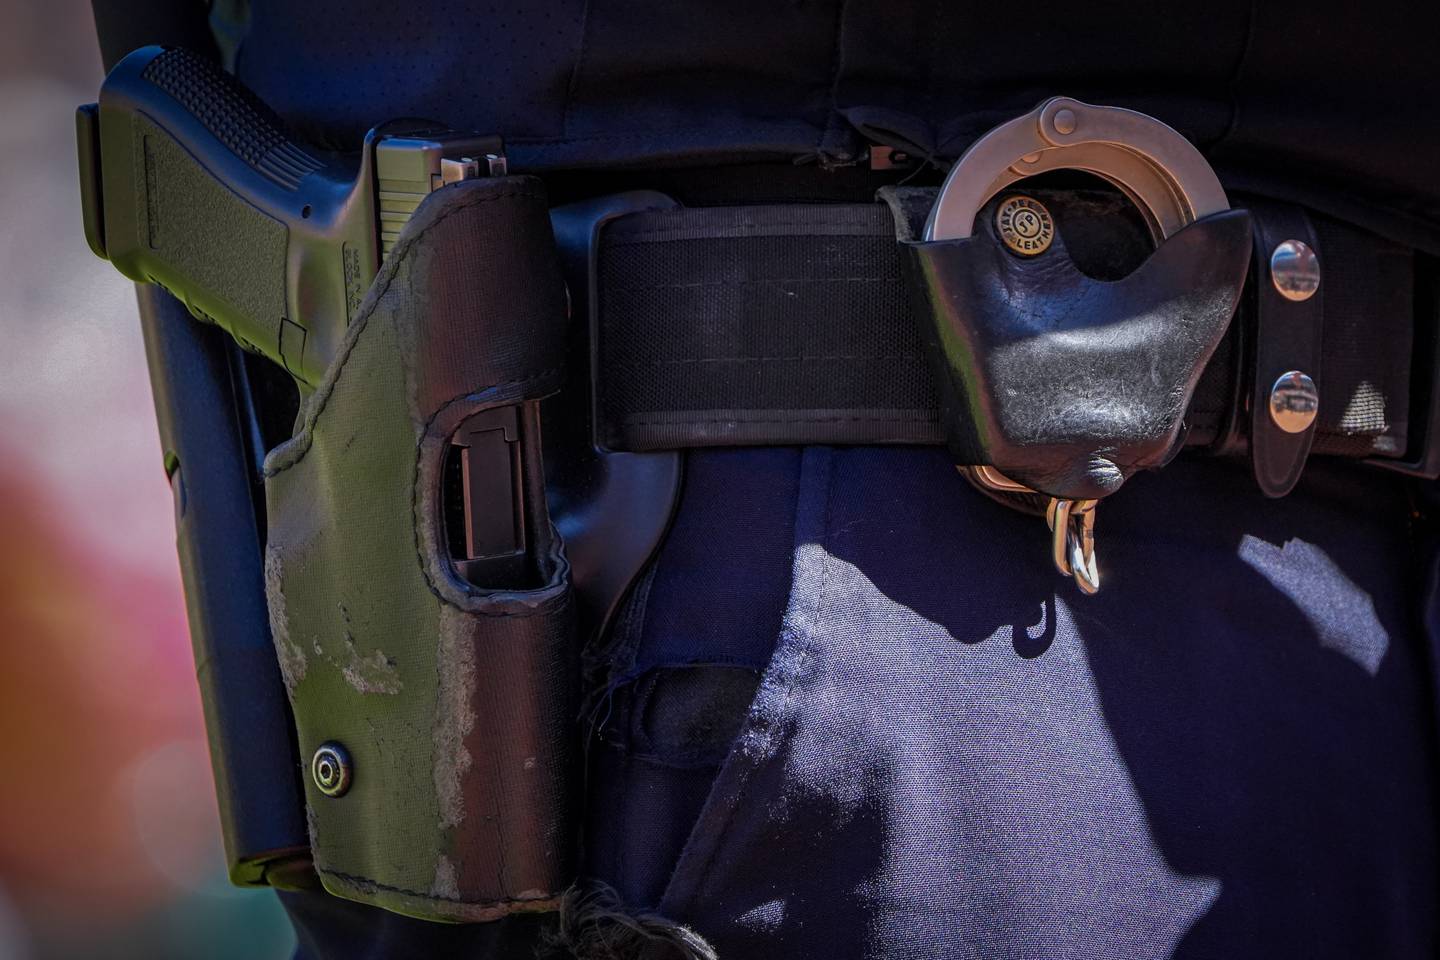 A Baltimore Police detective’s service pistol and handcuffs are secured on his belt as he observes the crowd in between innings during a baseball game against the Oakland Athletics held at Camden Yards on Wednesday, April 12. The Orioles beat the Athletics, 8-7, to win the series.